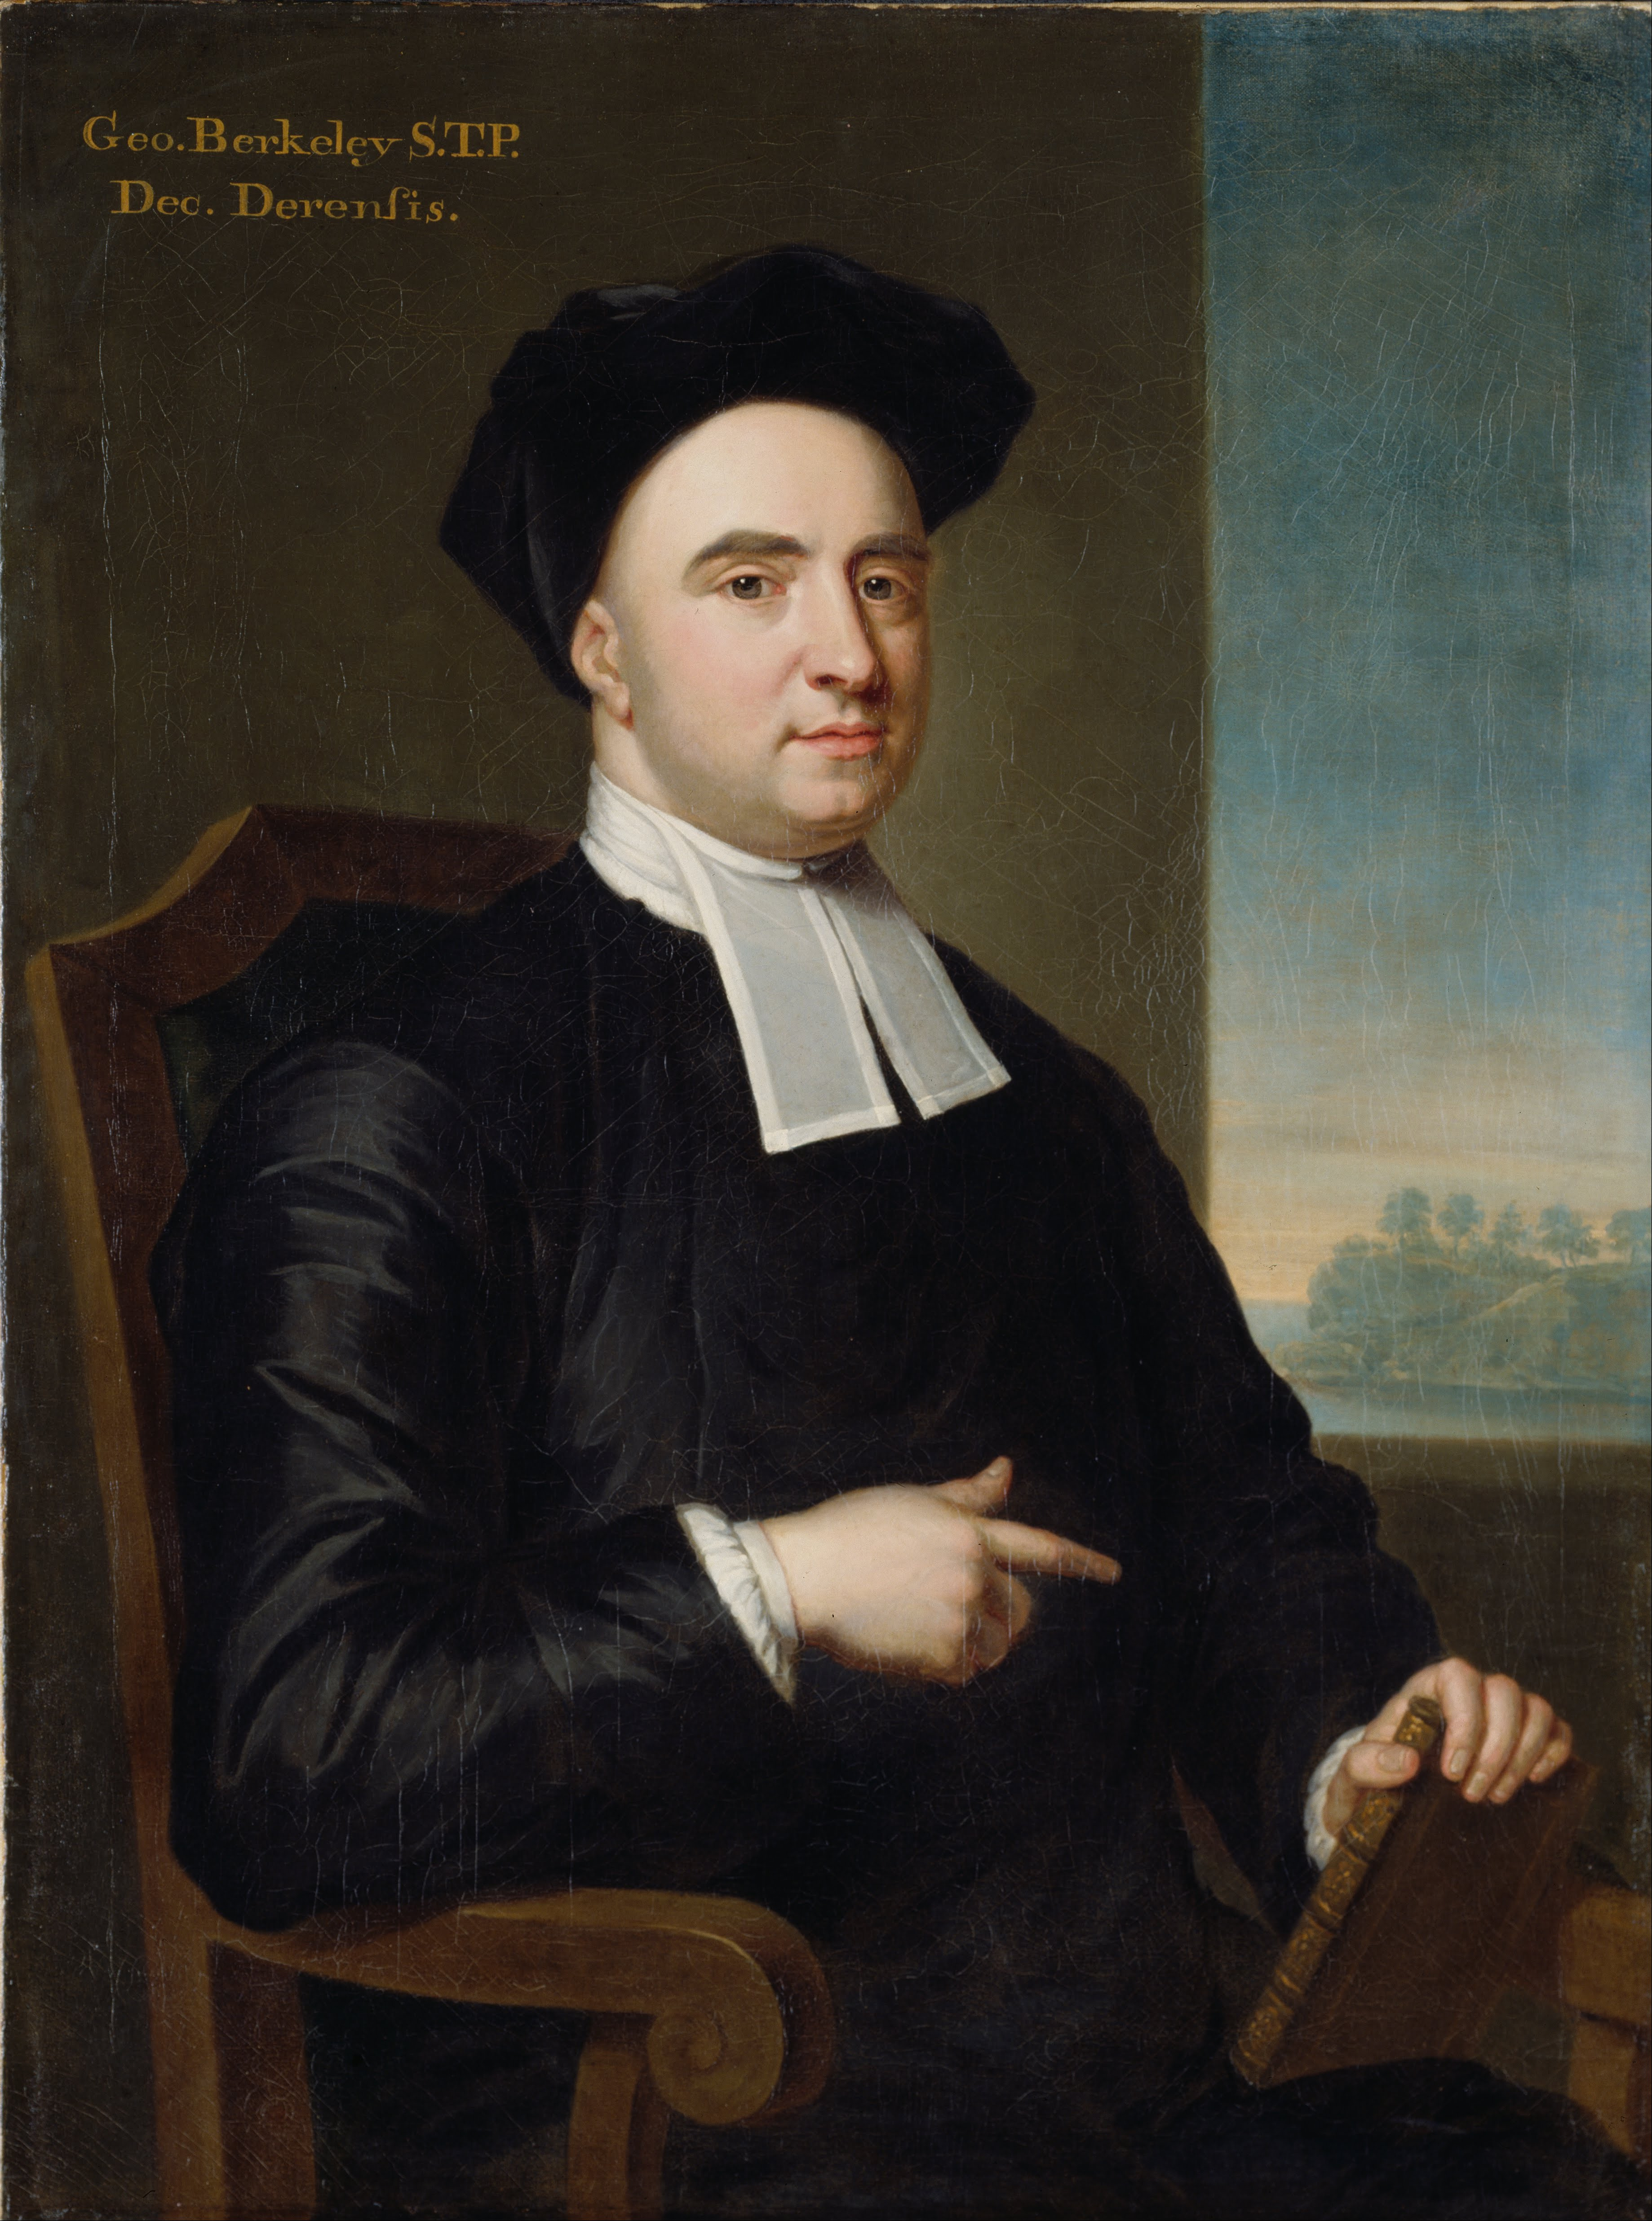 <p><strong>George Berkeley</strong></p>